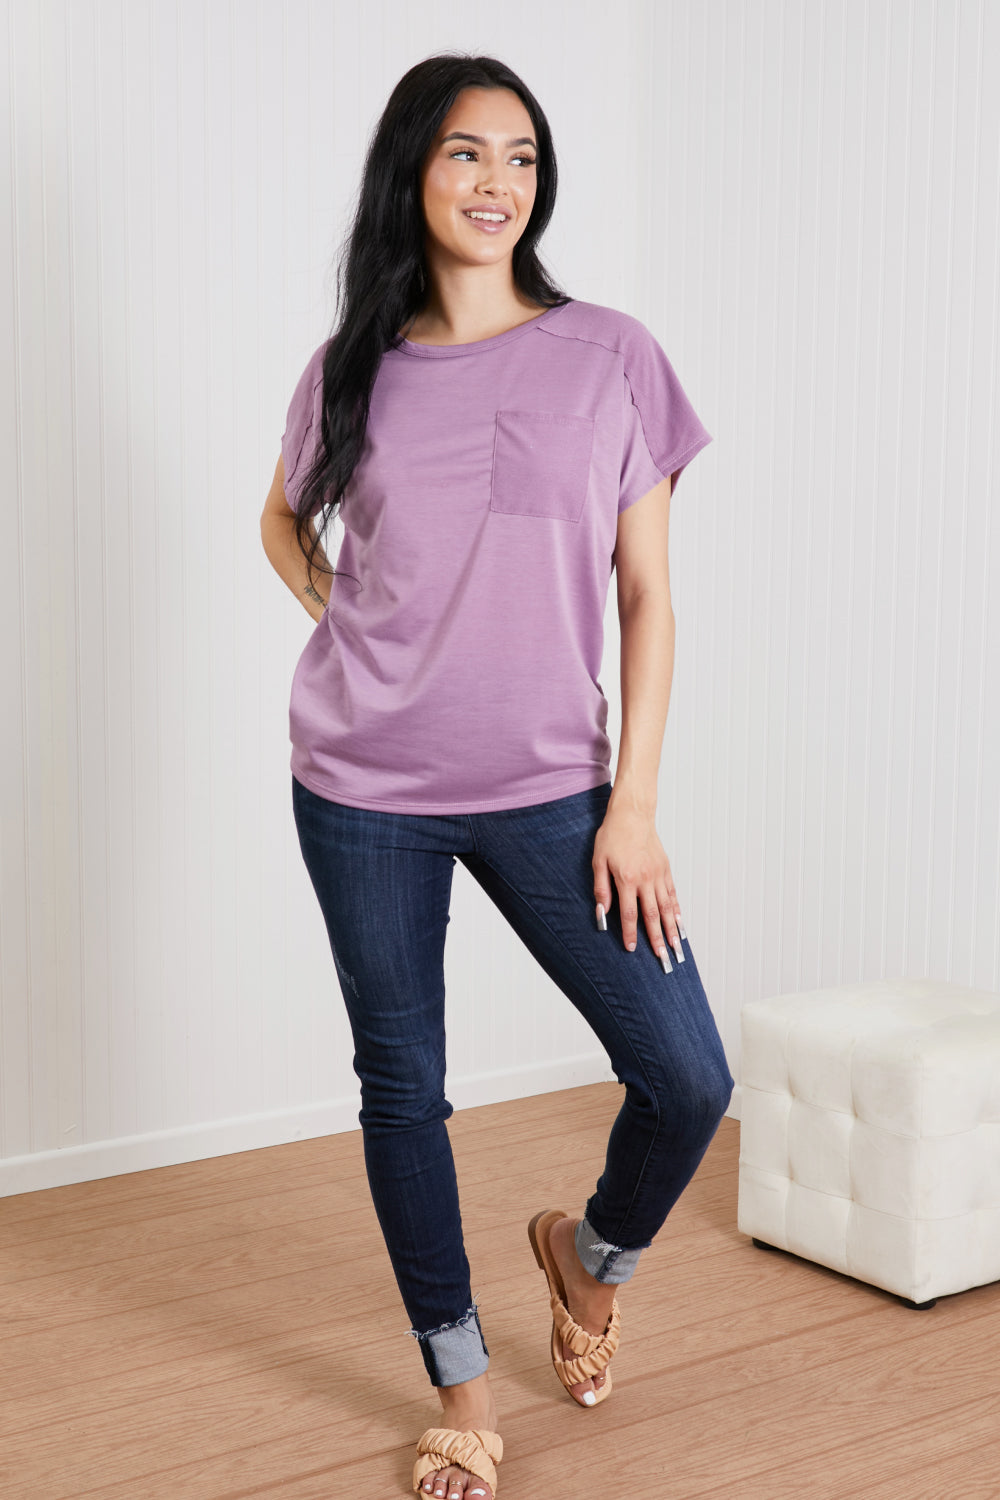 Sew In Love Stay and Chat Love Full Size Pocket Tee in Plum